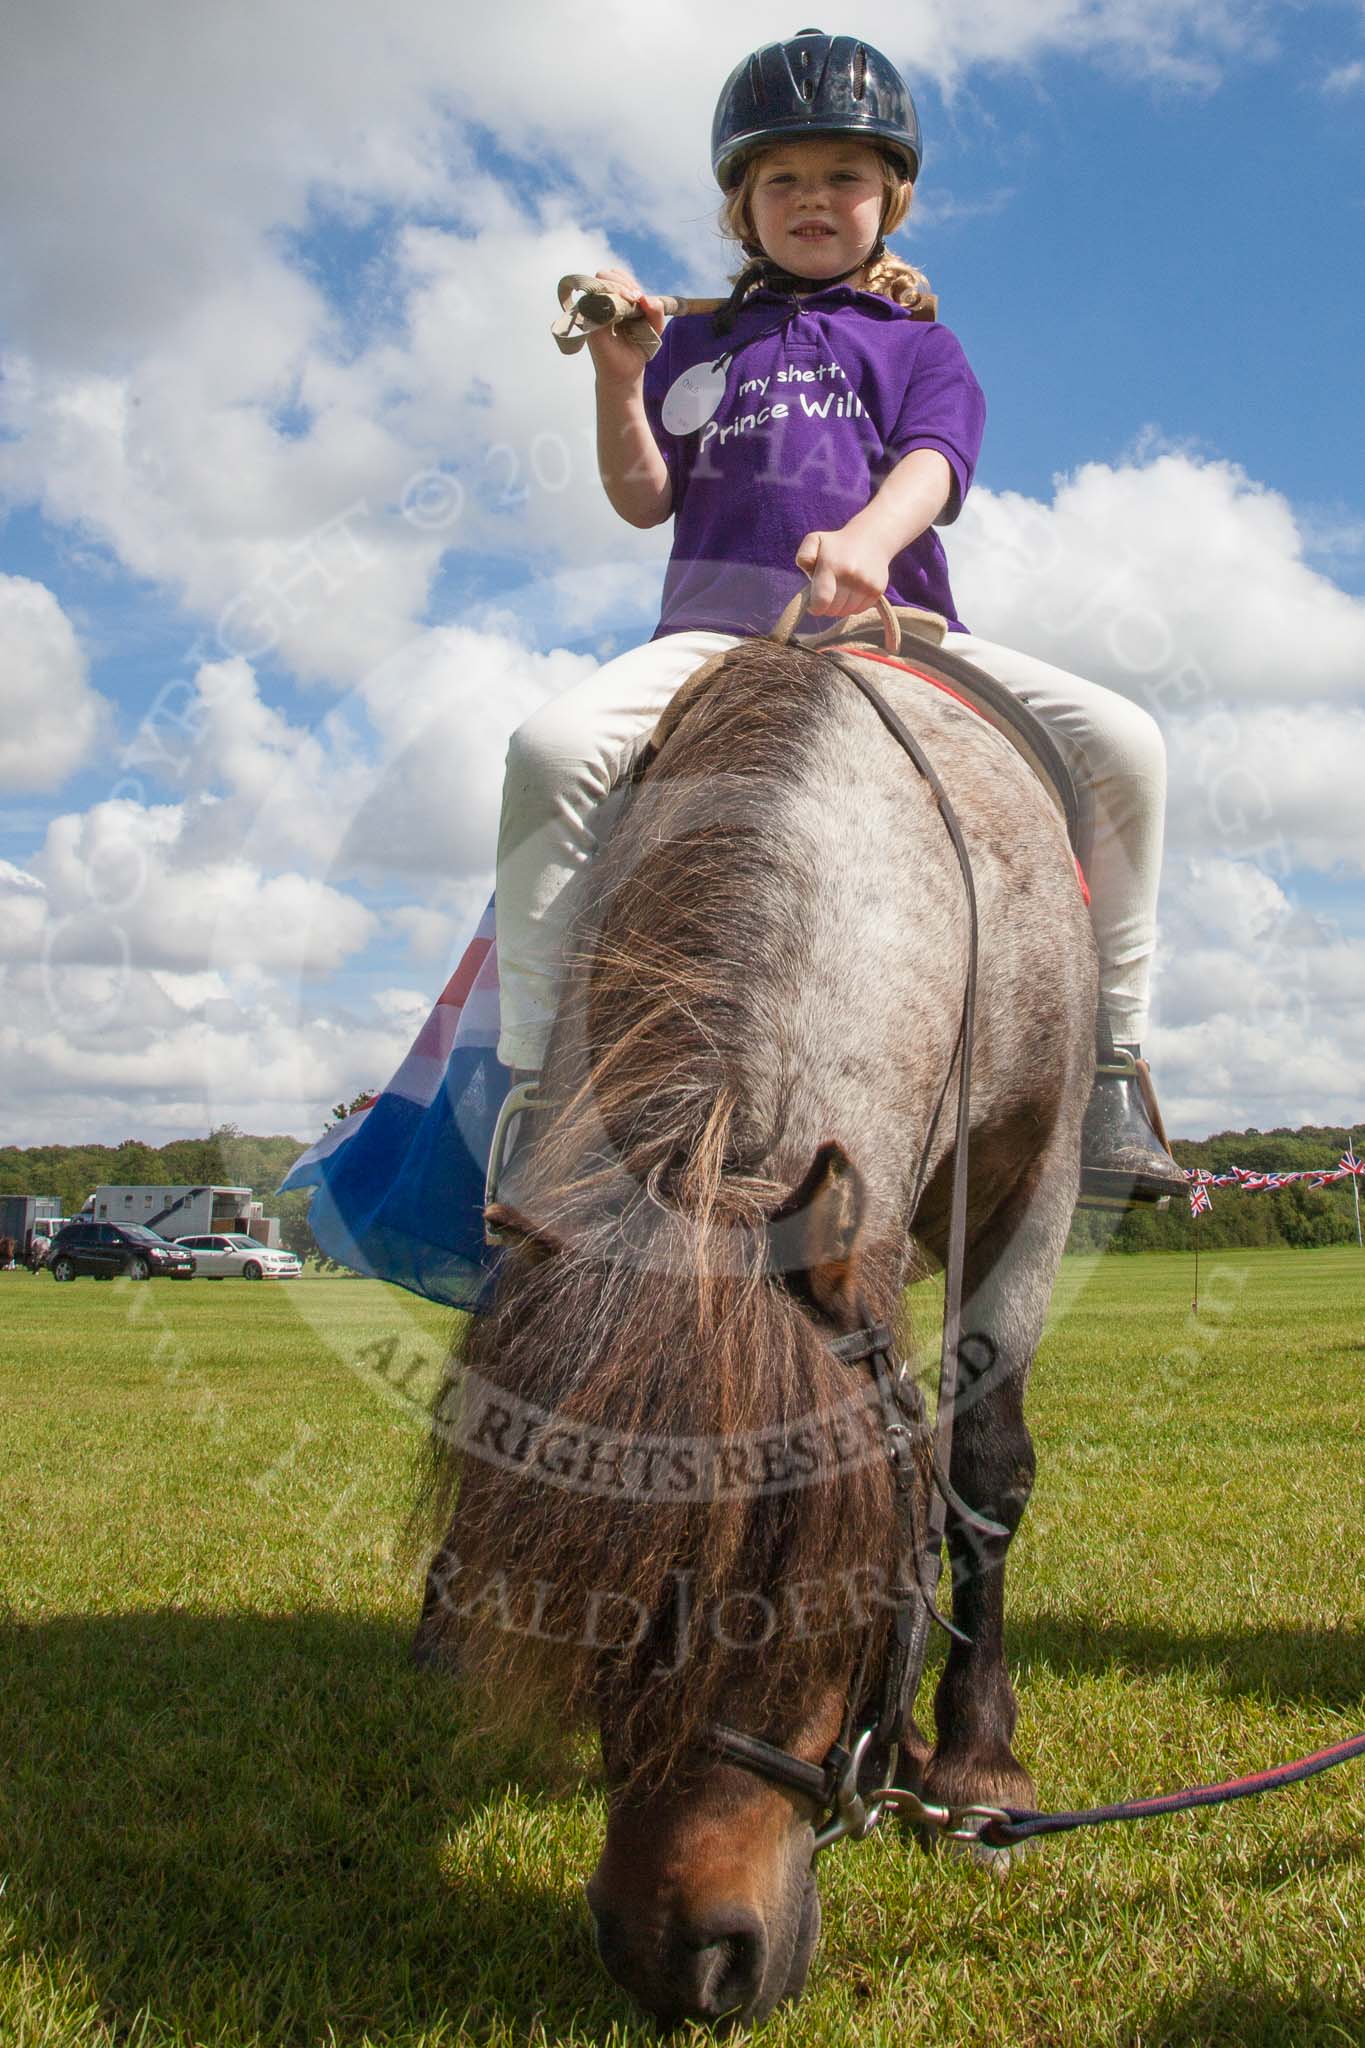 7th Heritage Polo Cup finals: The Sheltand Pony Club (www.shetlandponyclub.co.uk) with Pony called "Samson" hosting an Olympic Parade..
Hurtwood Park Polo Club,
Ewhurst Green,
Surrey,
United Kingdom,
on 05 August 2012 at 14:50, image #114